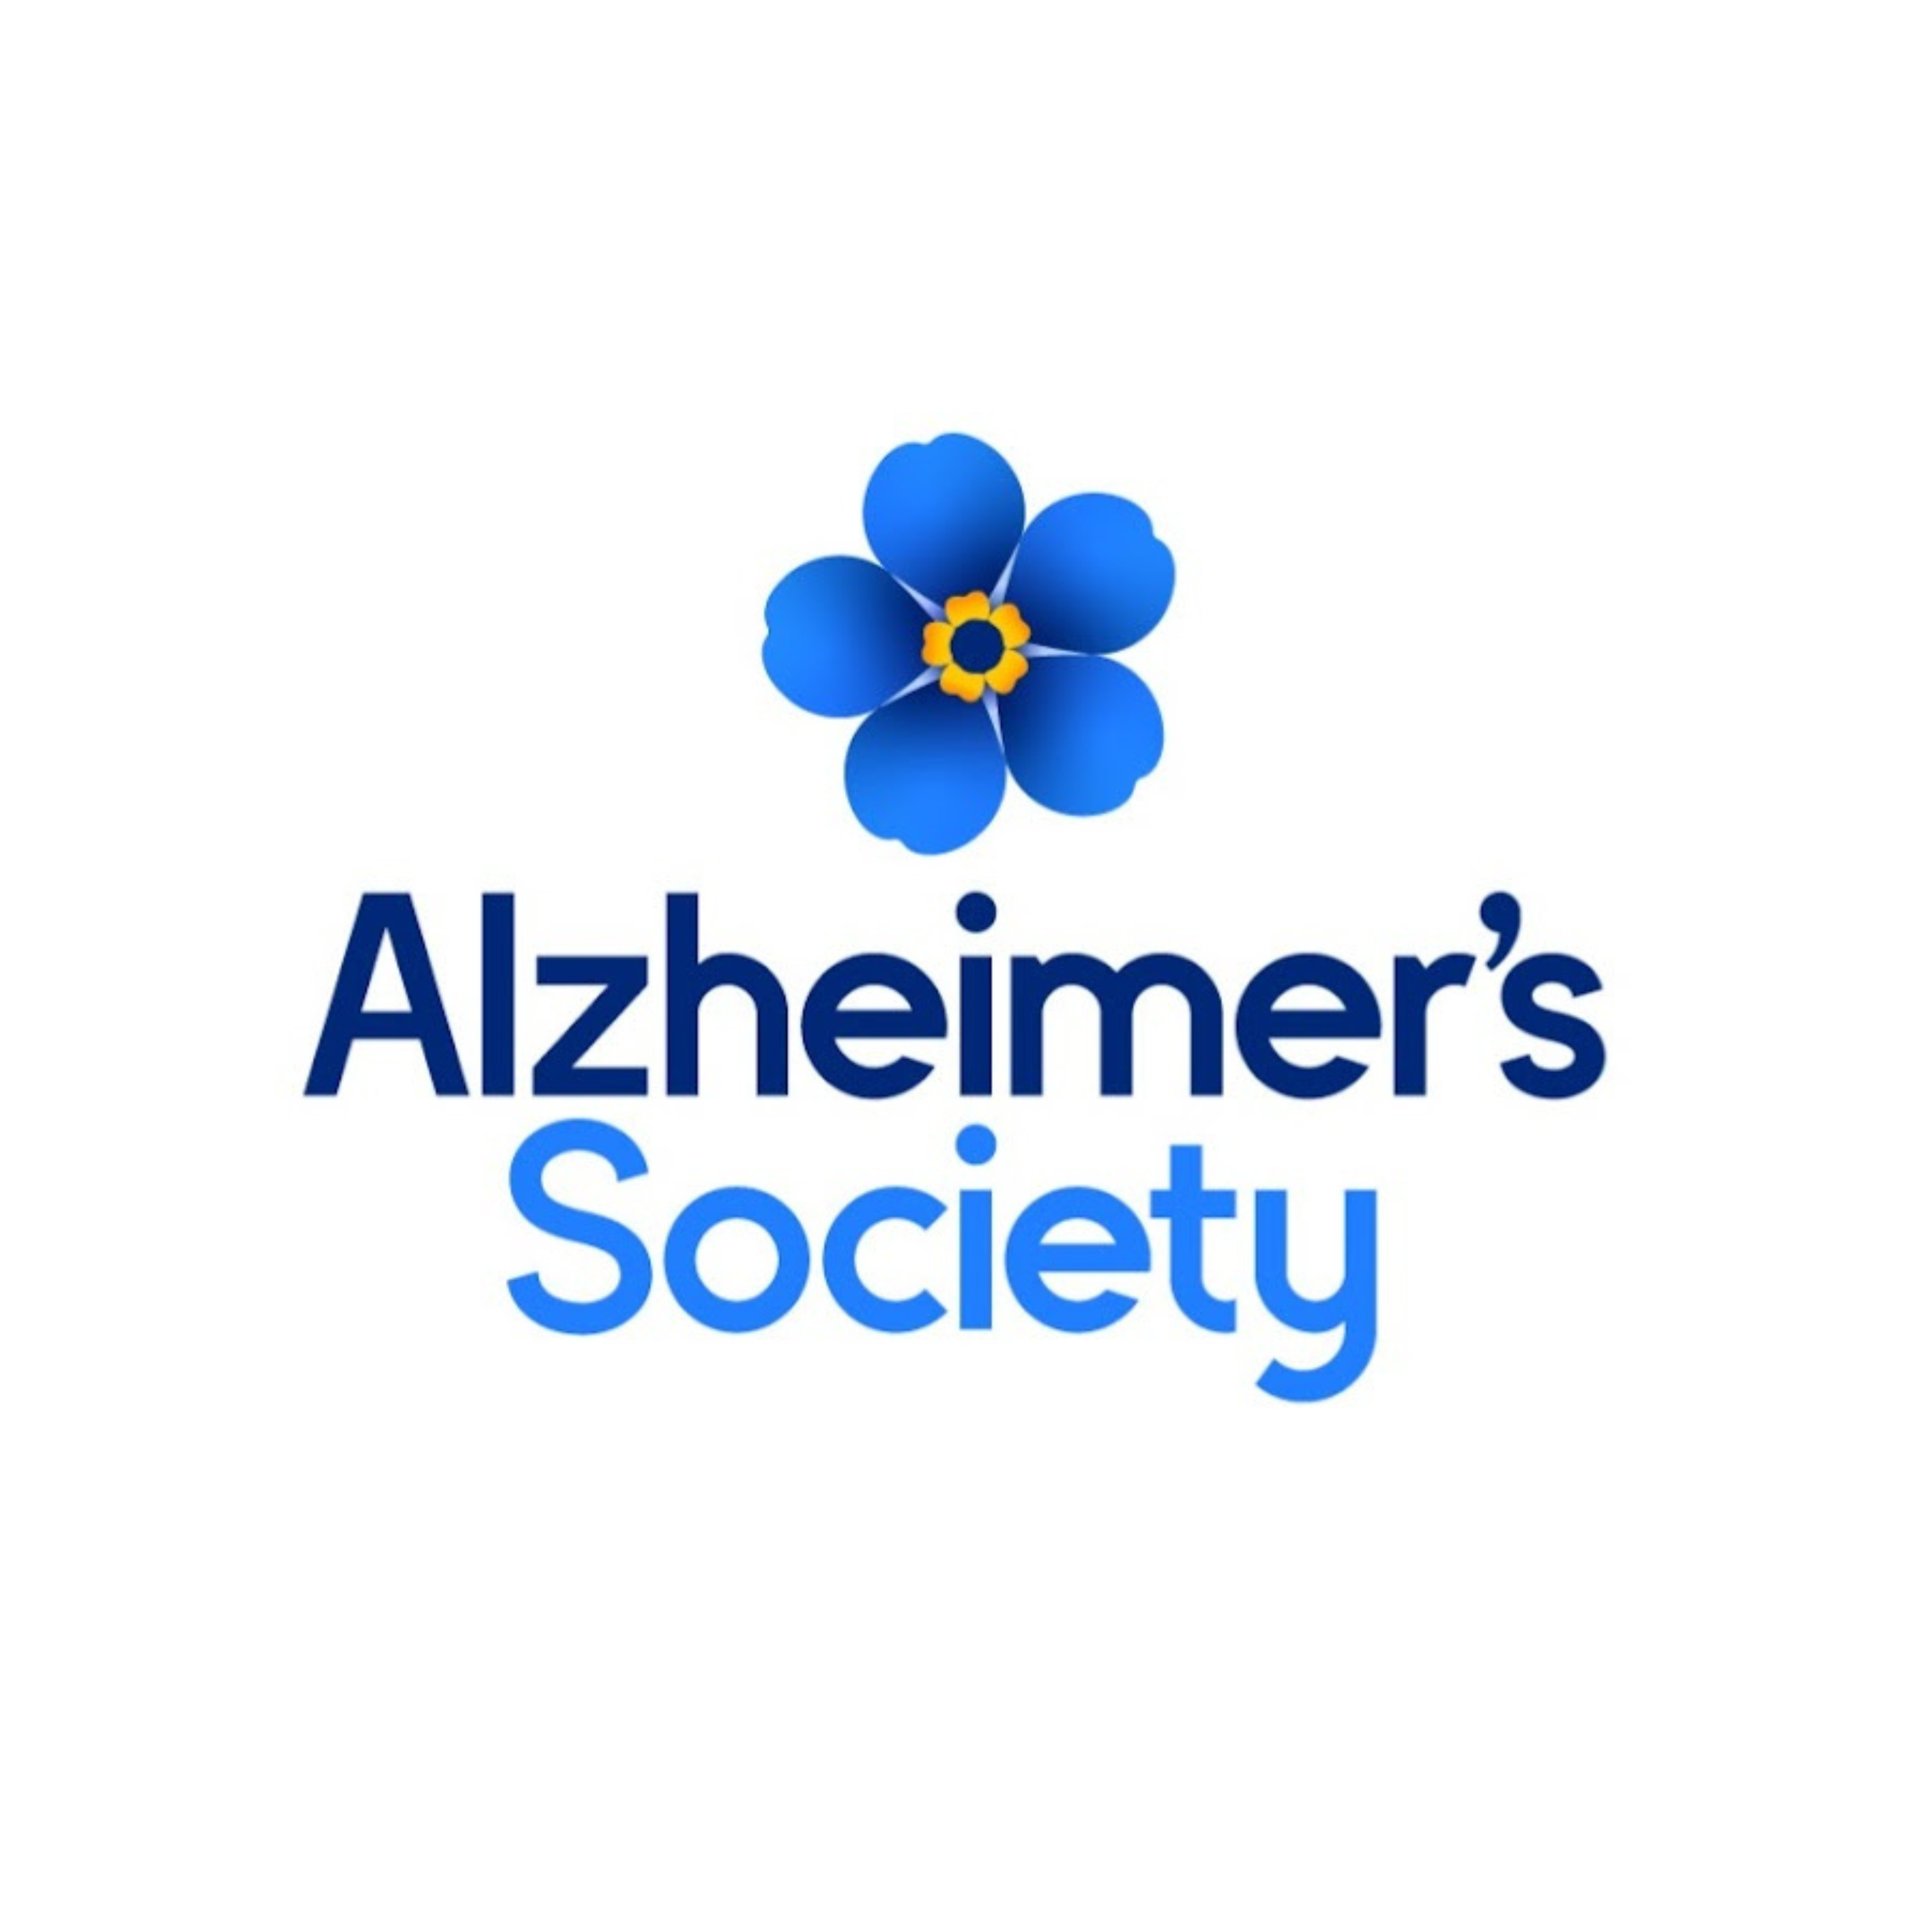 Alzheimer's Society Logo - Supporting Dementia and Alzheimer's Research and Care